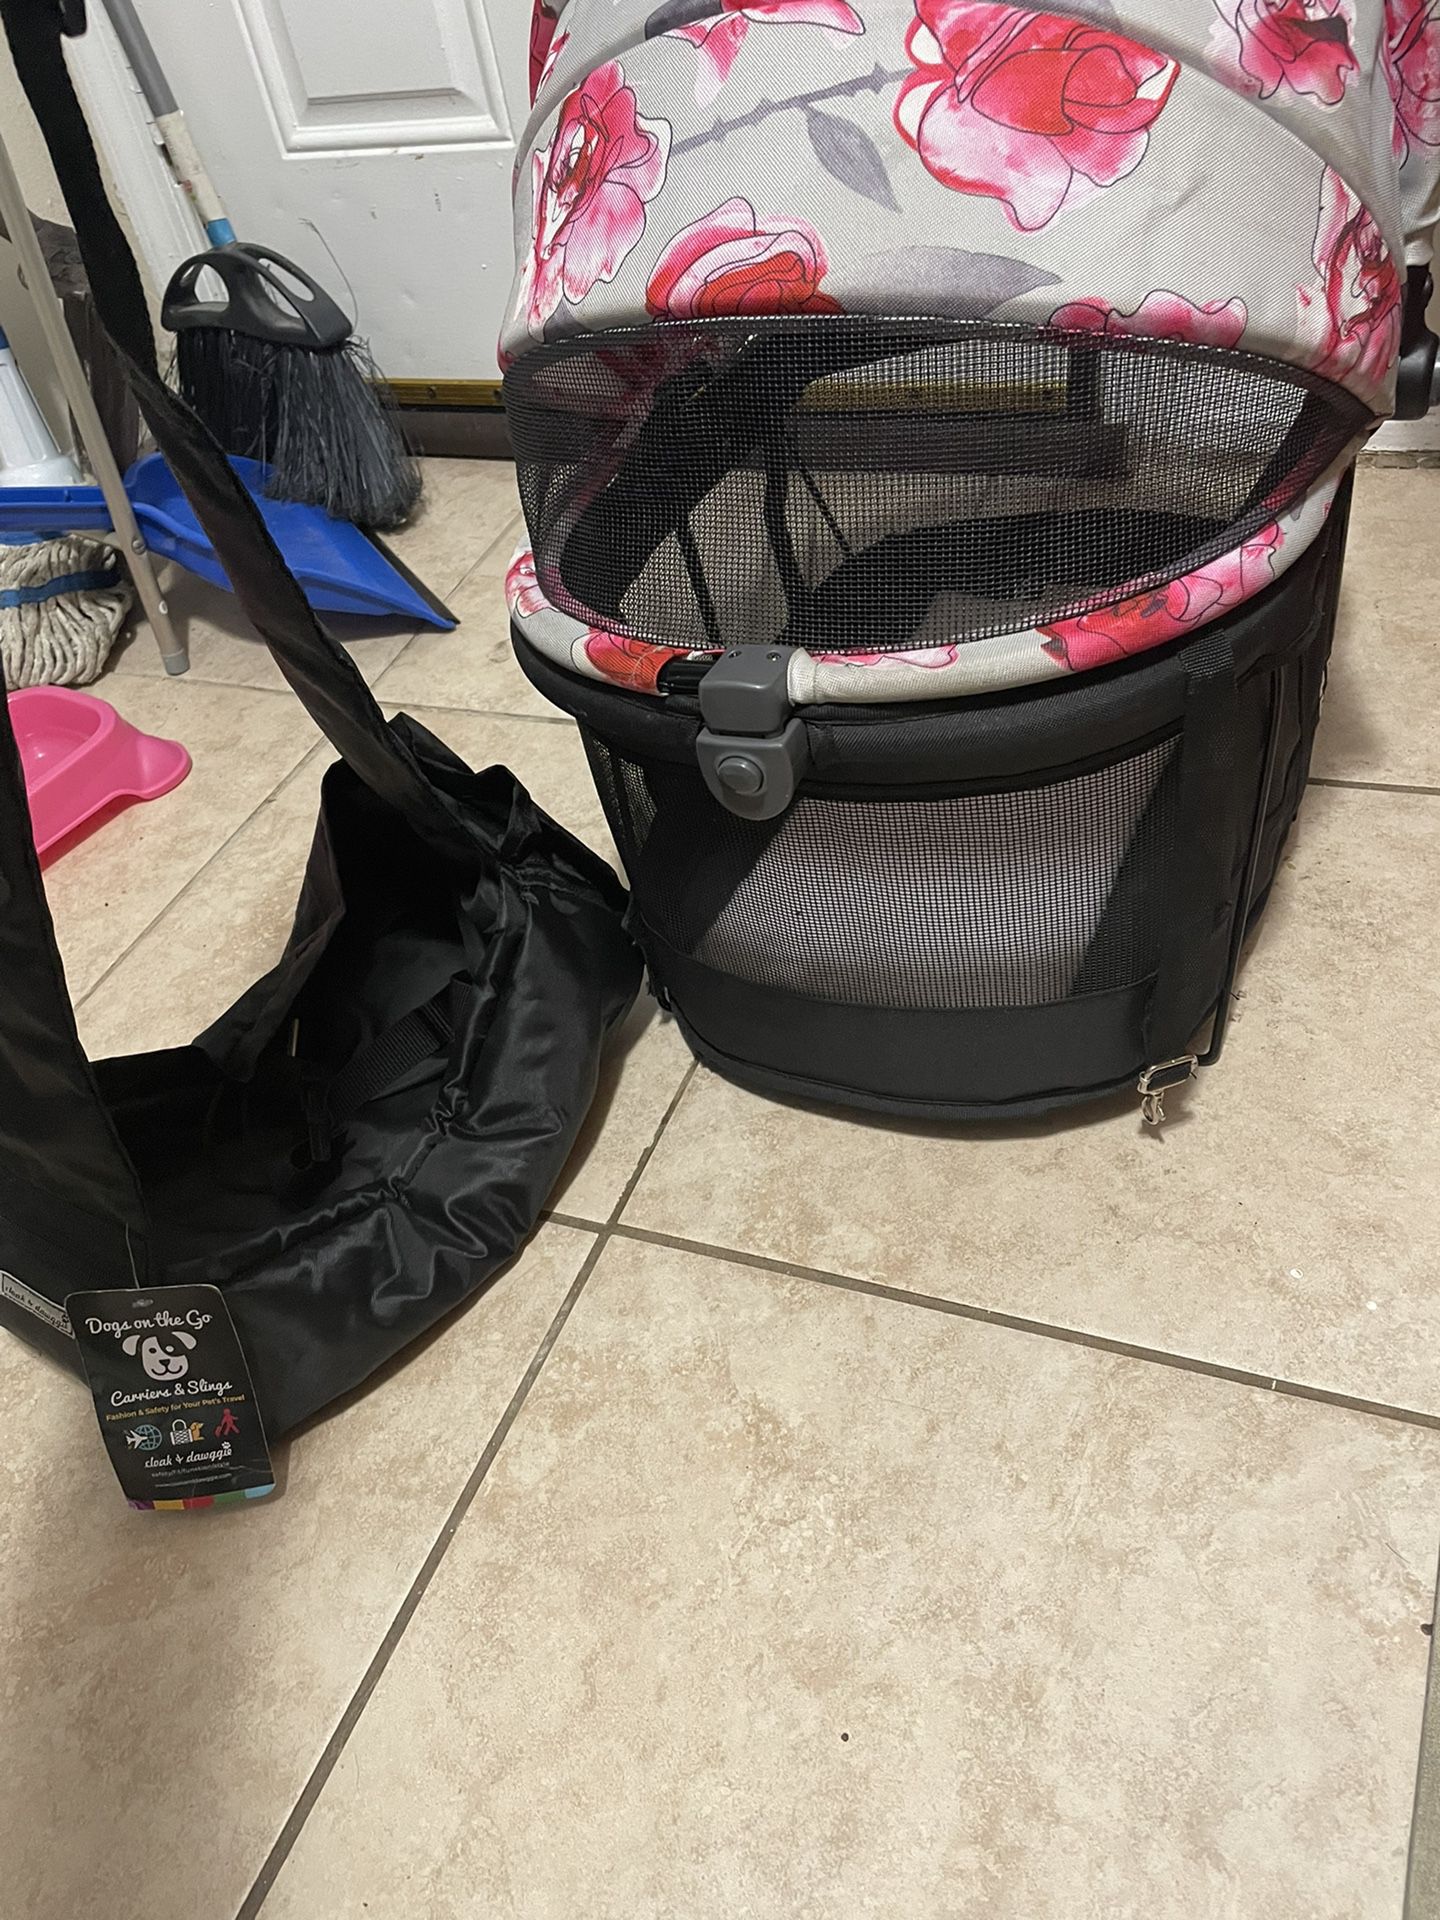 Dog Carseat Carrier And Bag Carrier Everything For 50.00 need gone today